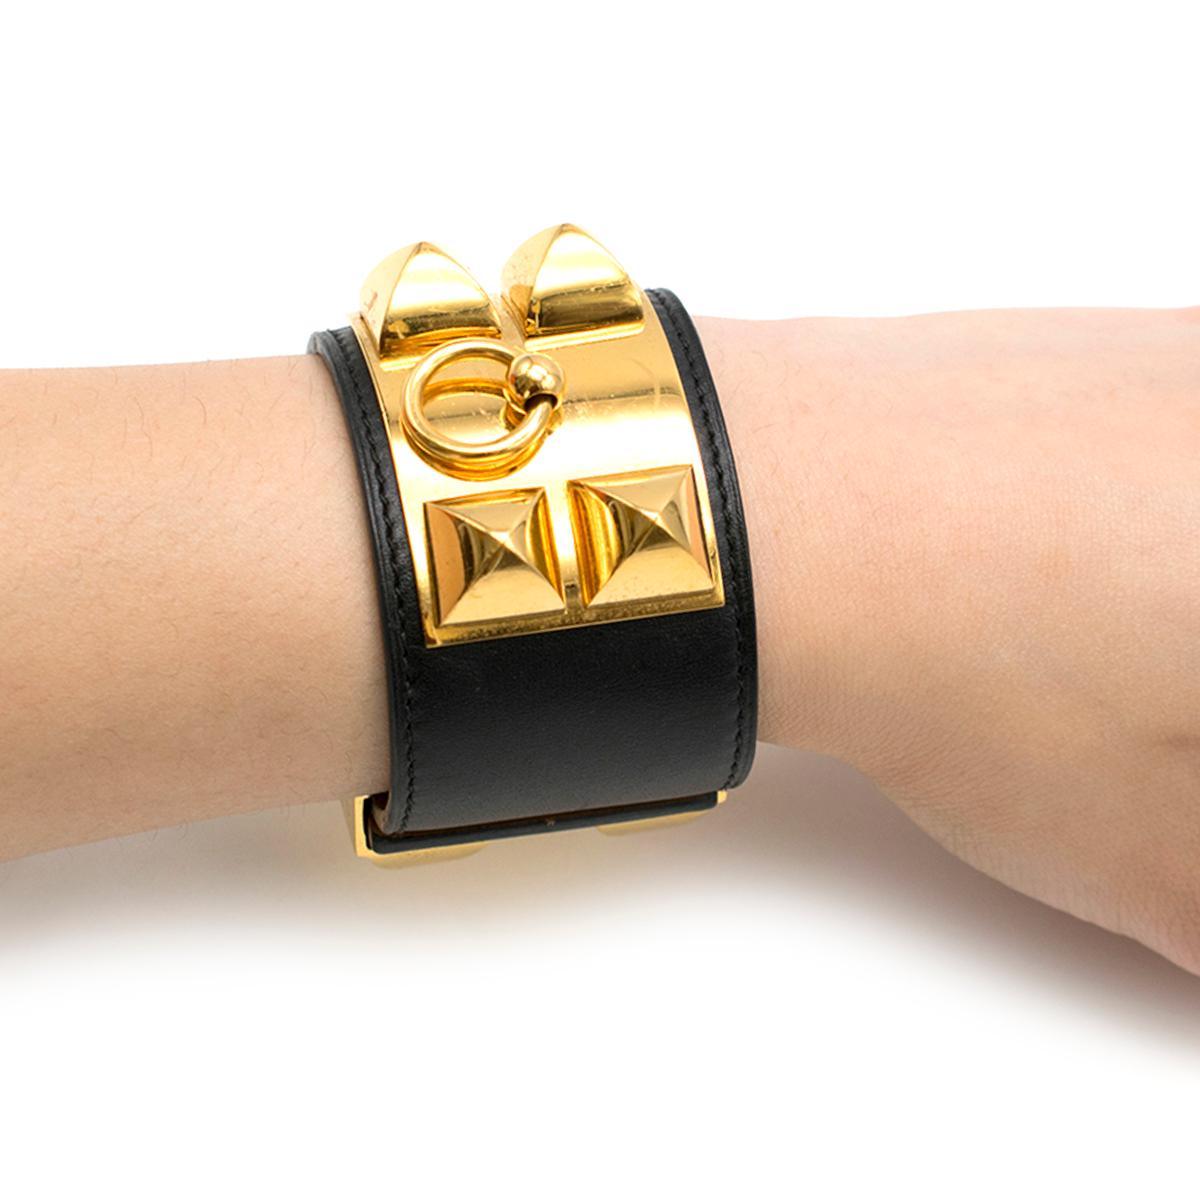 Hermes Black Collier de Chien Bracelet

- material- calfskin leather
- gold plated Medor pyramid studs and ring
- adjustable closure 
- this item comes with an additional dustbag and box

Please note, these items are pre-owned and may show some